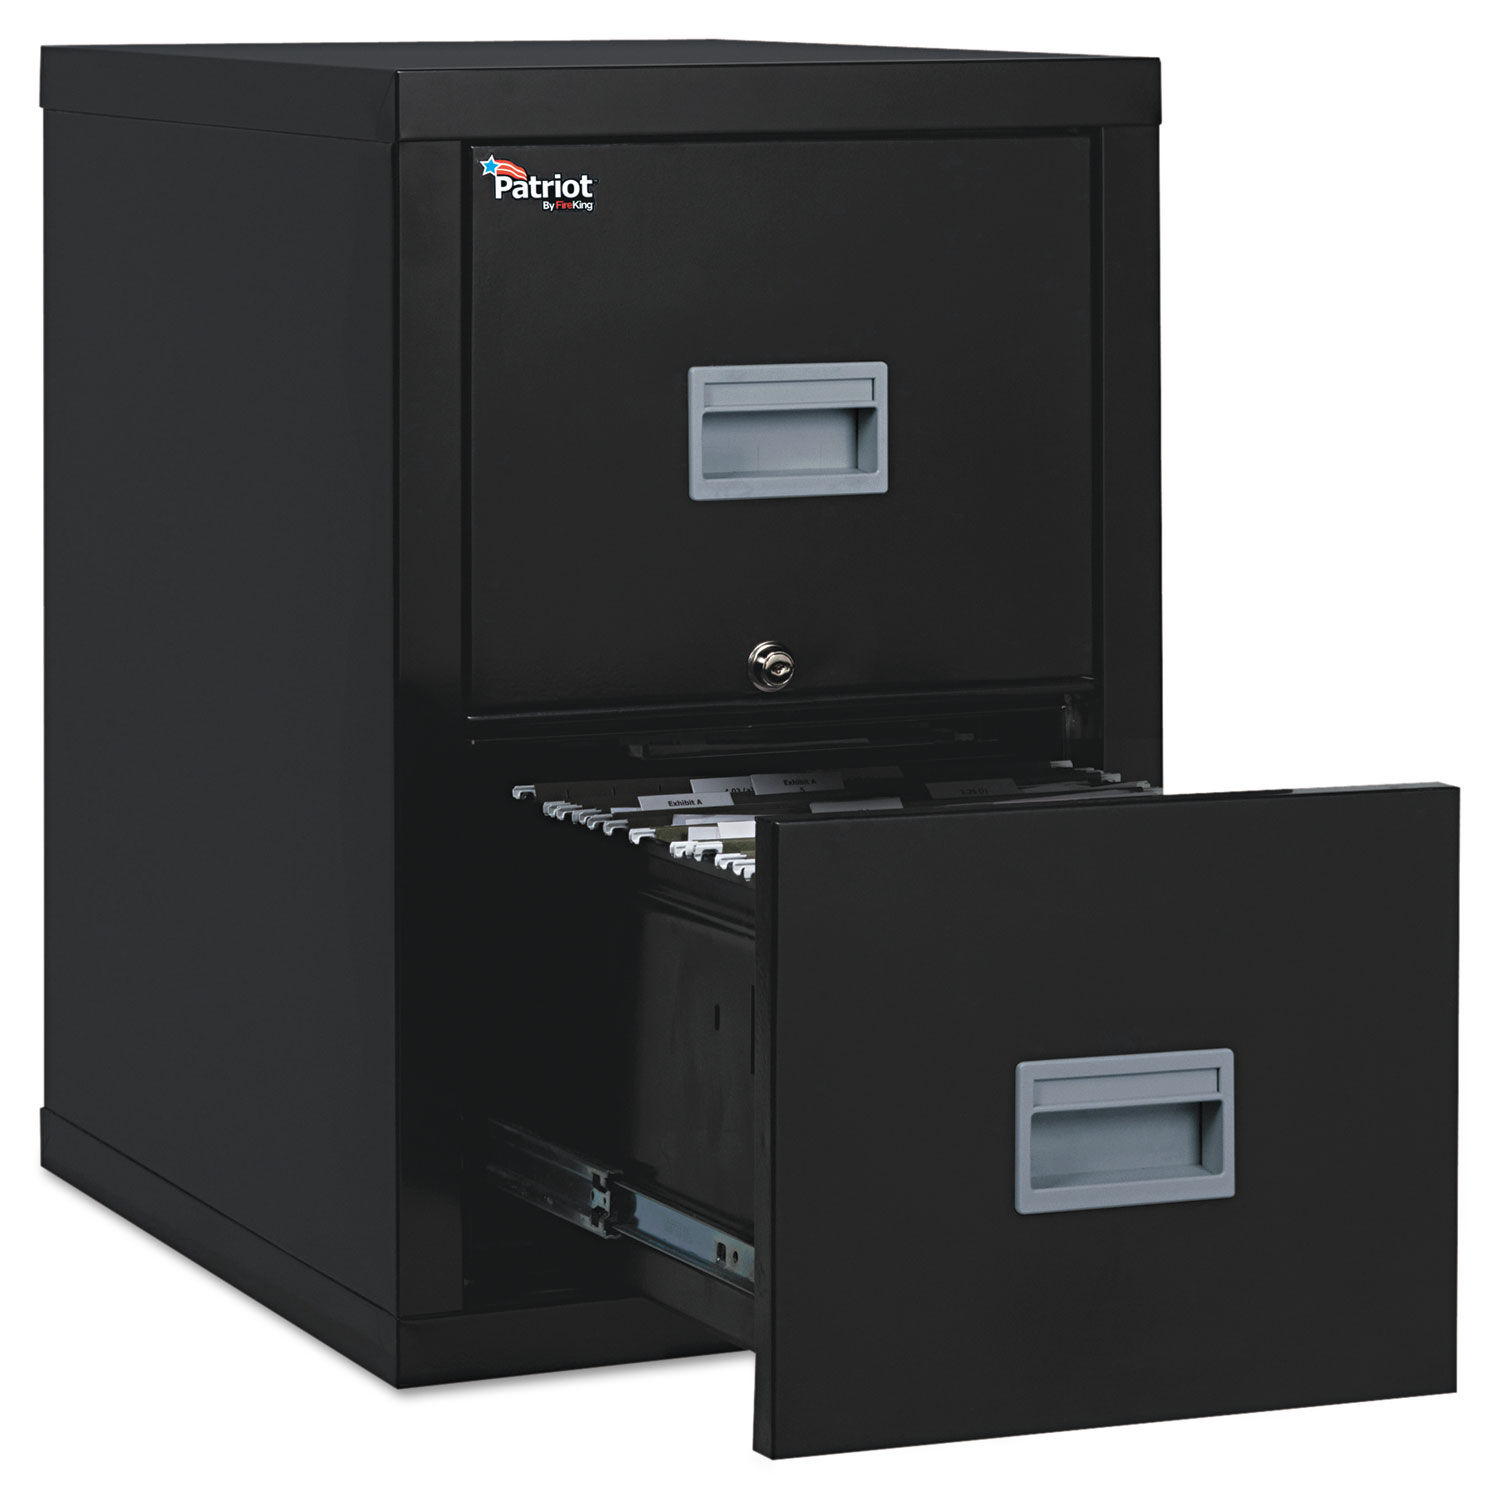 Patriot by FireKing Insulated Fire File 1-Hour Fire Protection, 2 Legal/Letter File Drawers, Black, 17.75" x 25" x 27.75"